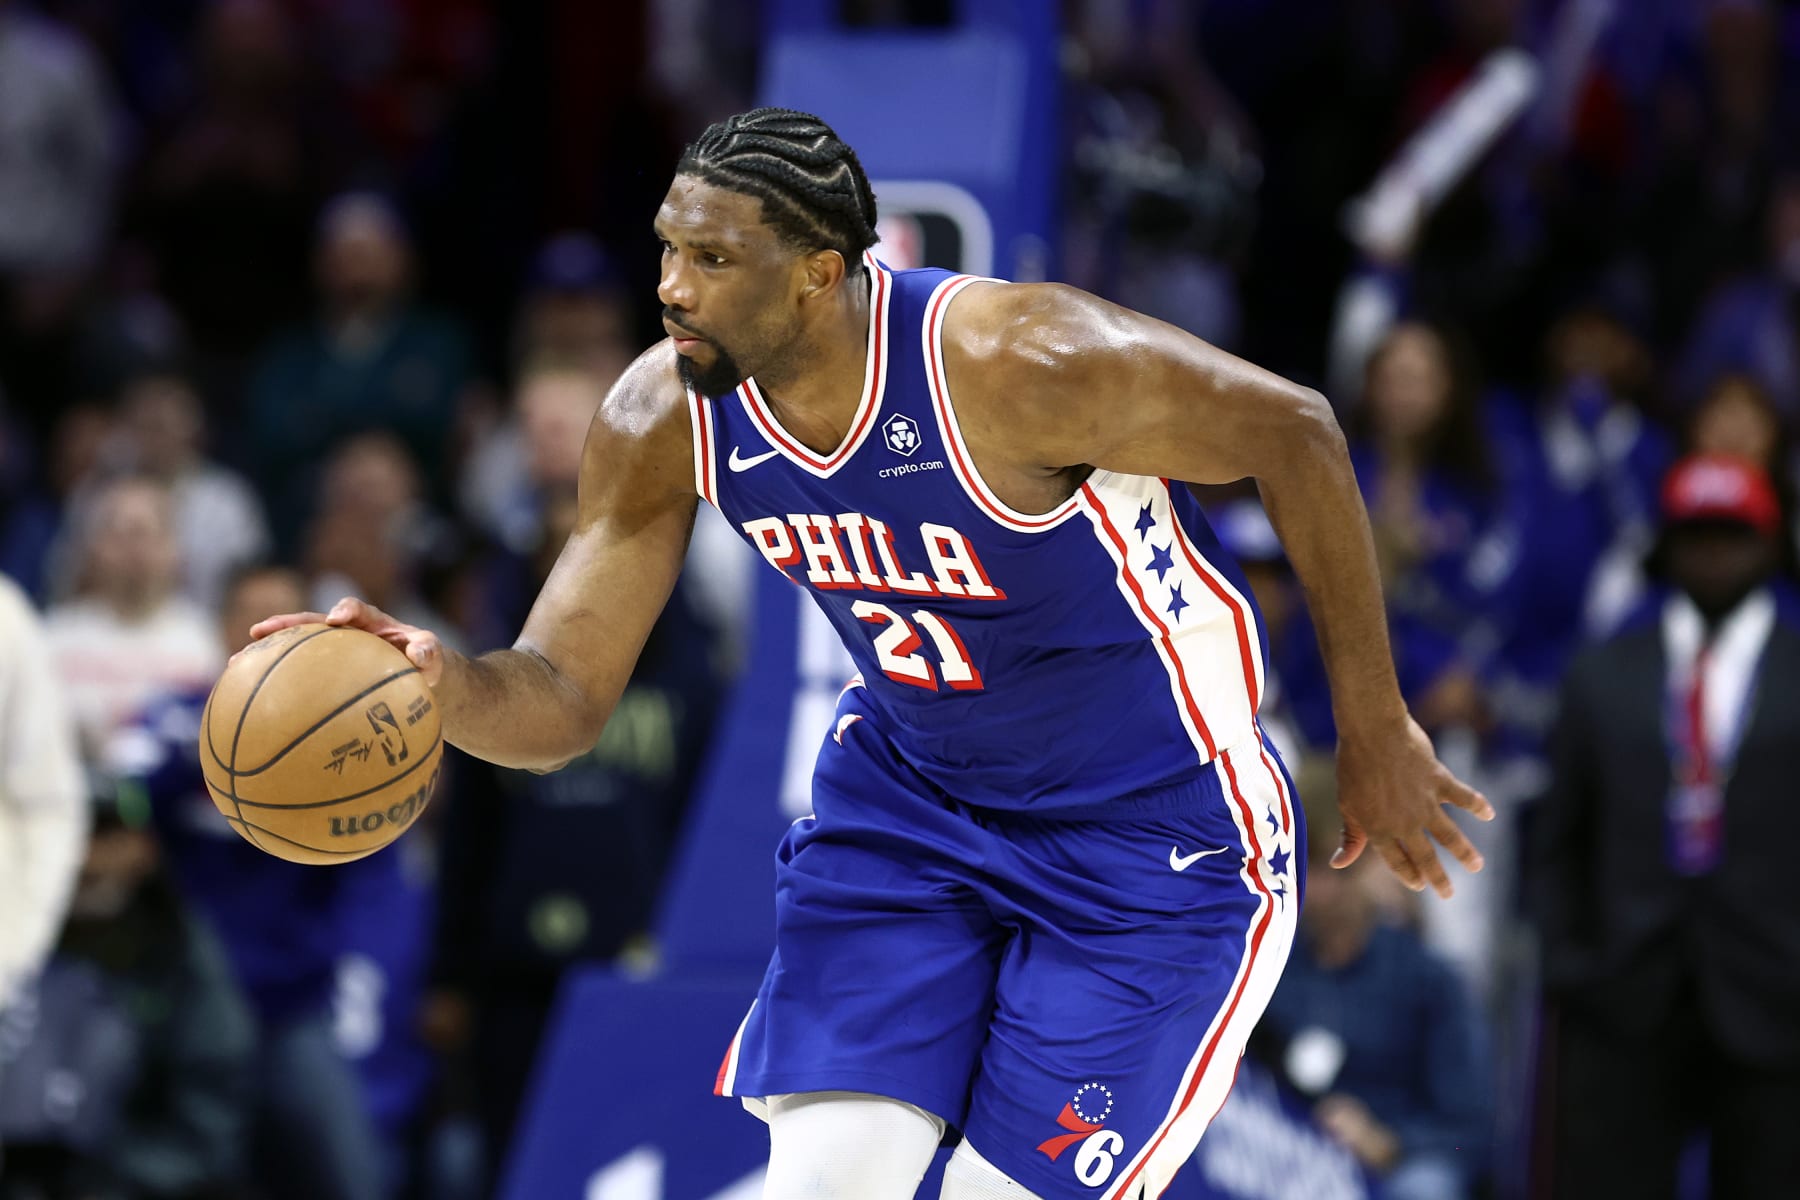 Joel Embiid of the 76ers Opens Up About Mental Health Struggles After Injury: ‘It Was Depressing’